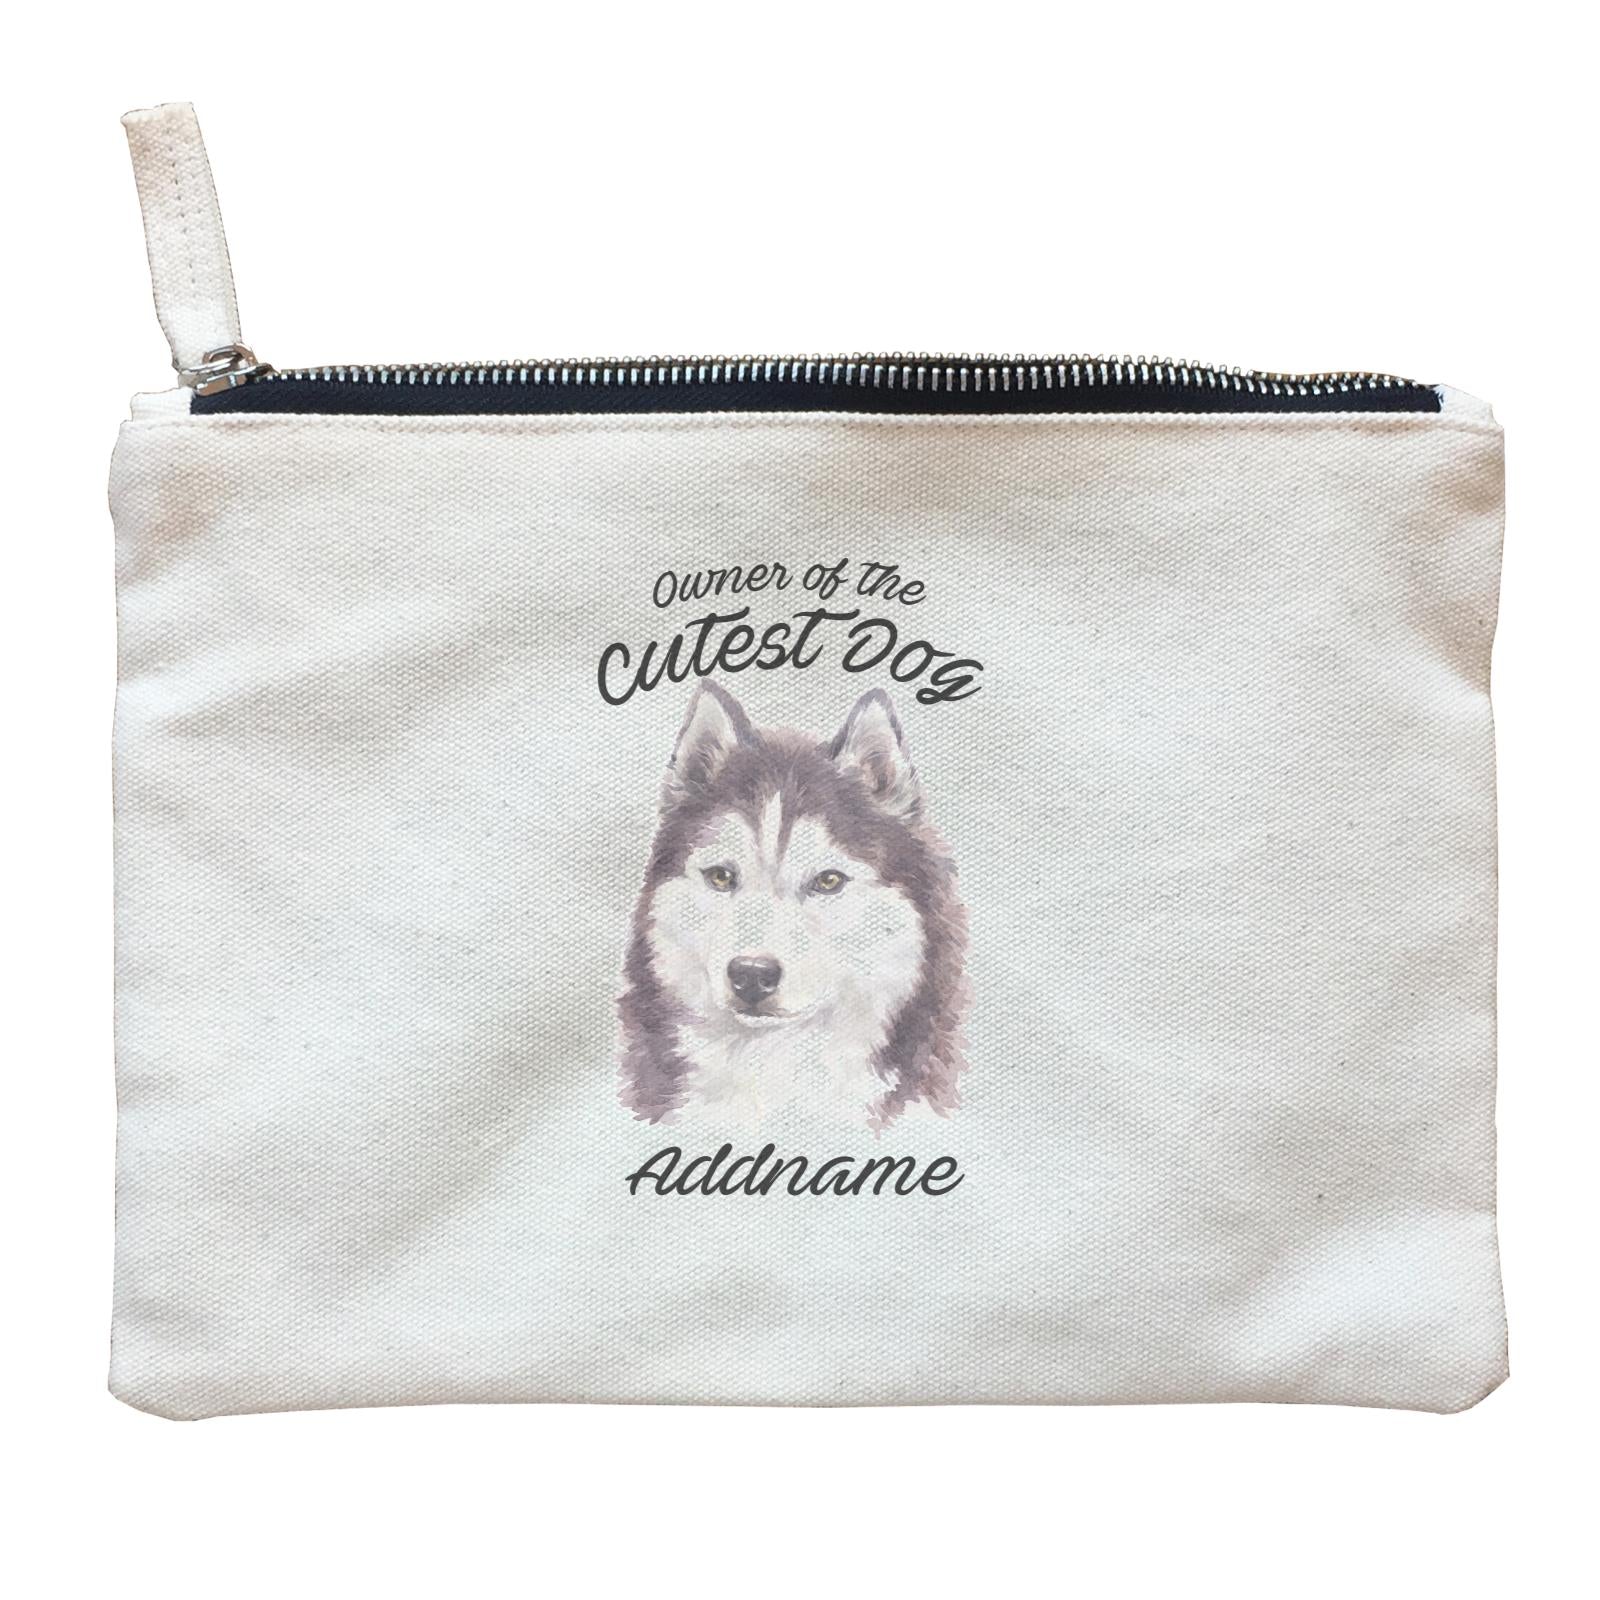 Watercolor Dog Owner Of The Cutest Dog Siberian Husky Cool Addname Zipper Pouch